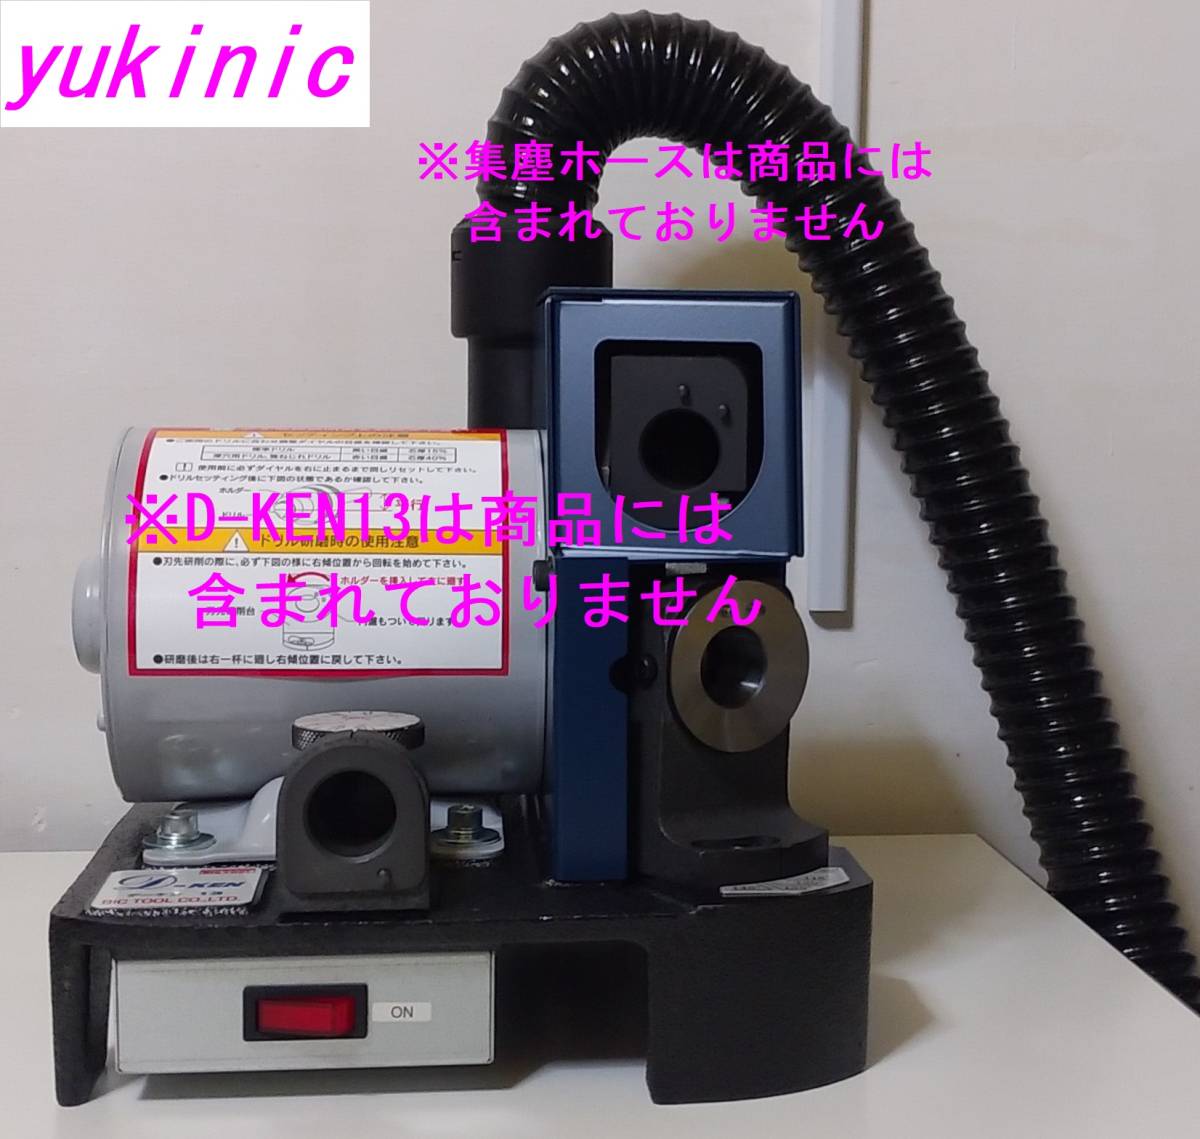  outlet new goods yukinic Bick tool drill grinding machine D-KEN13 exclusive use dust collector connection adaptor SPA-01( long pipe specification )